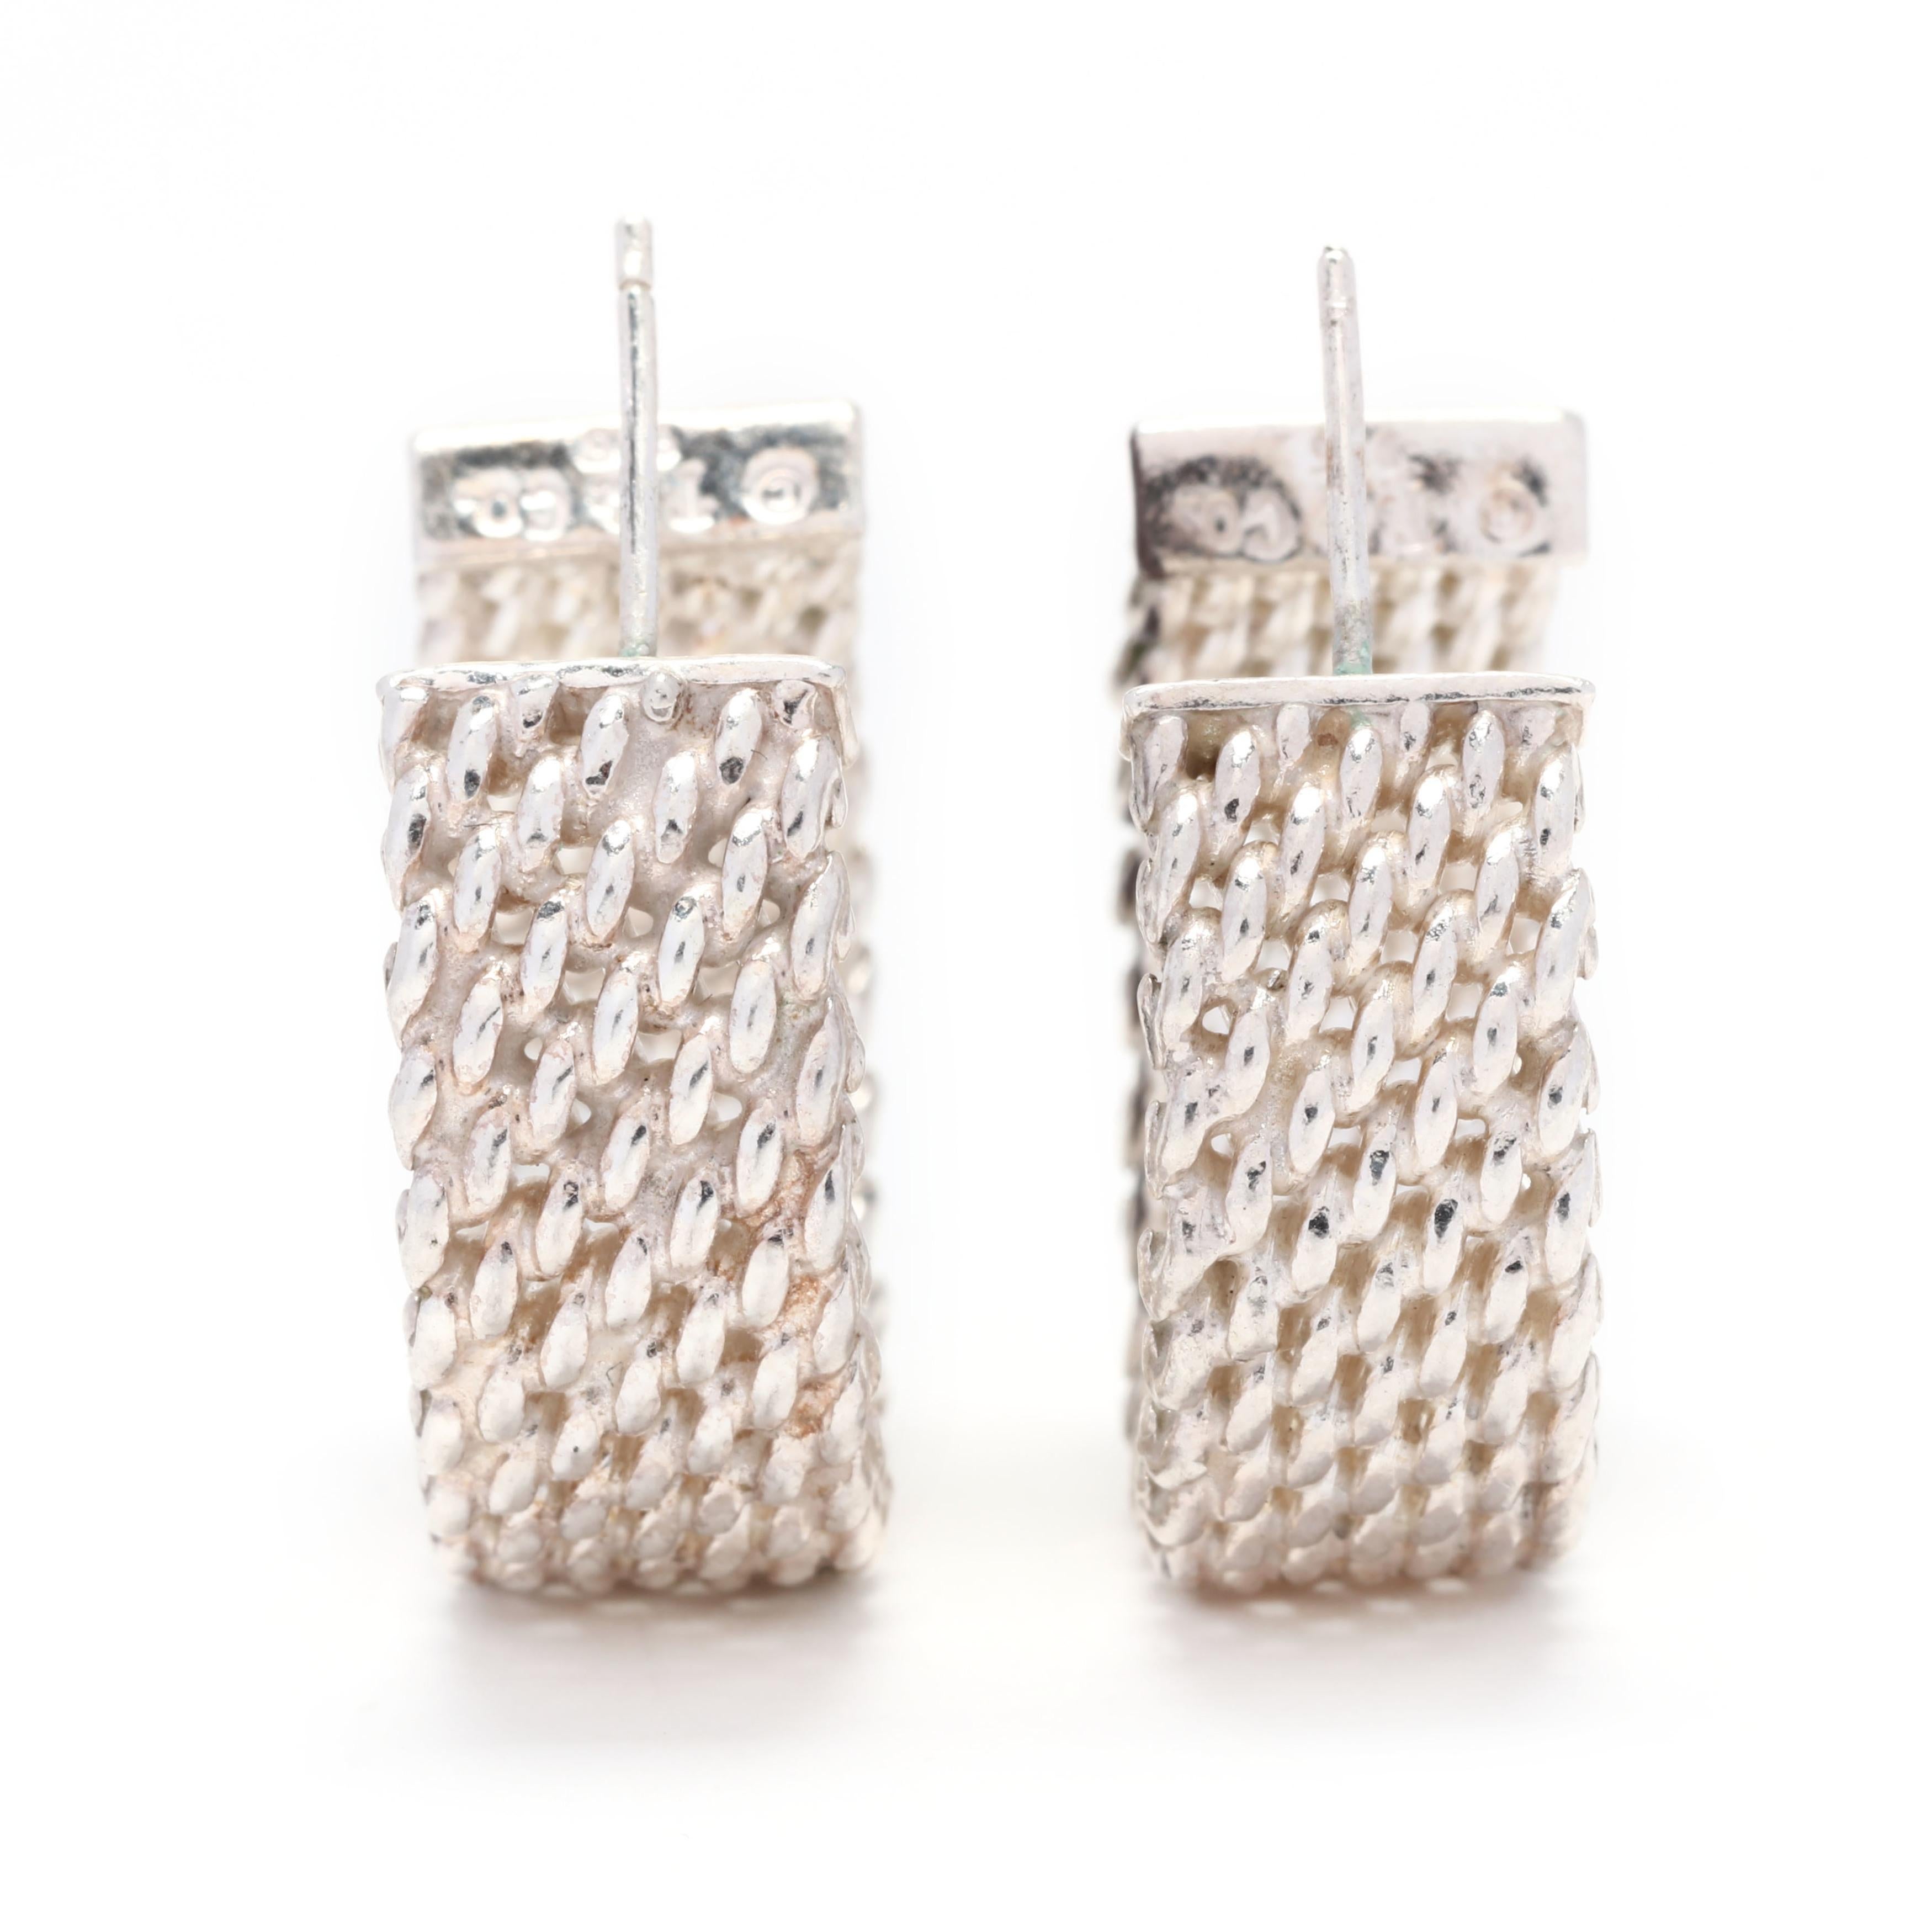 A pair of Tiffany and Company sterling silver Somerset wide hoop earrings. These earrings feature a mesh chain link design with pierced push backs. Please note that these earrings have replacement butterfly backs.



Length: 7/8 in.



Width: 5/16